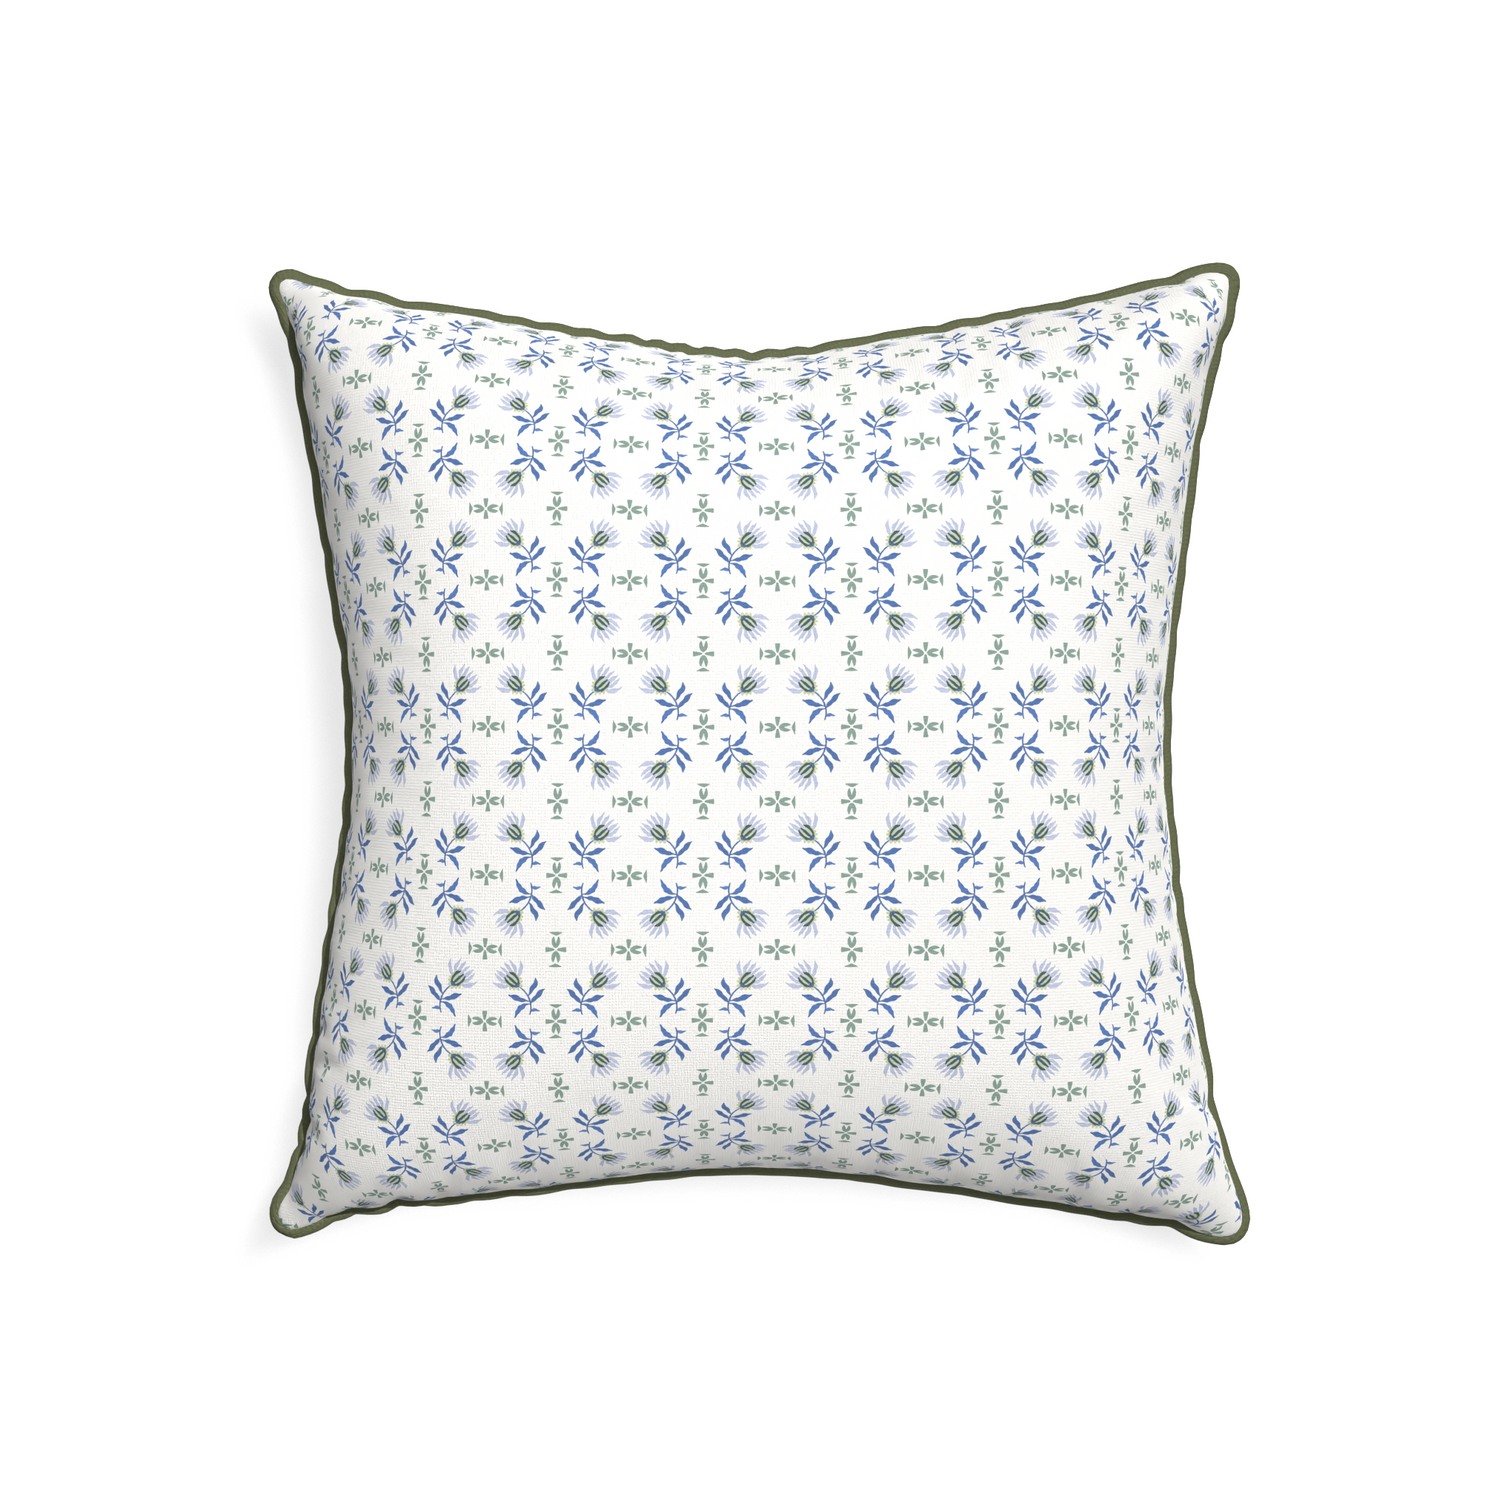 22-square lee custom pillow with f piping on white background